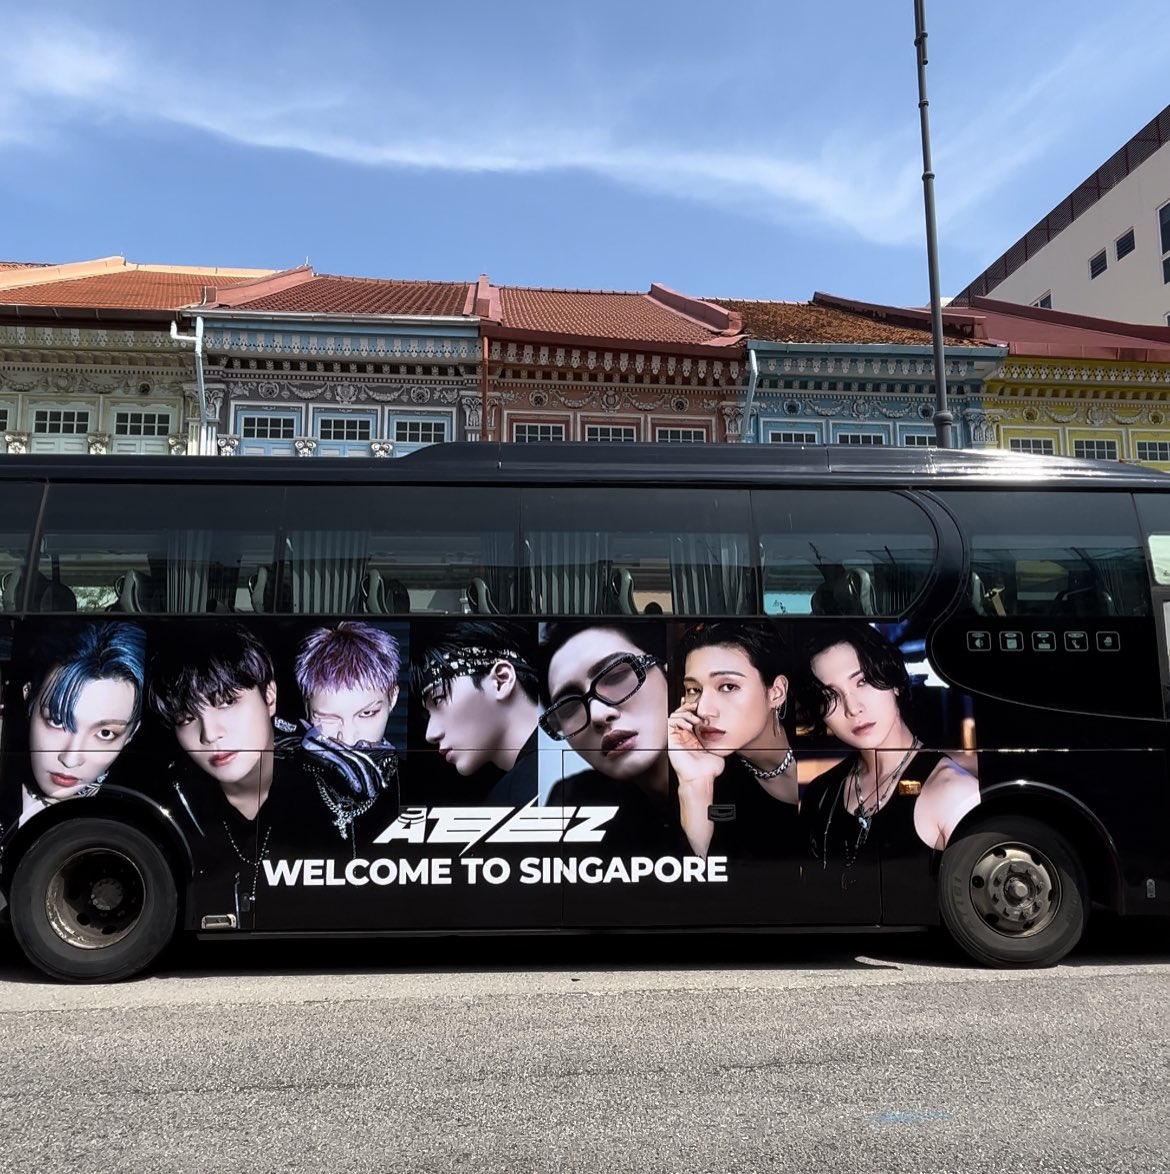 All aboard the ATEEZ SINGAPORE bus 🚌 Thank you, Joo Chiat! 👋🏼 If you didn’t manage to catch us, fret not, because we have one last final stop! 📍 DESTINATION: #TheFellowshipinSingapore 📸 Catch you tomorrow! #ATEEZinSG #ATEEZWantedInSEA